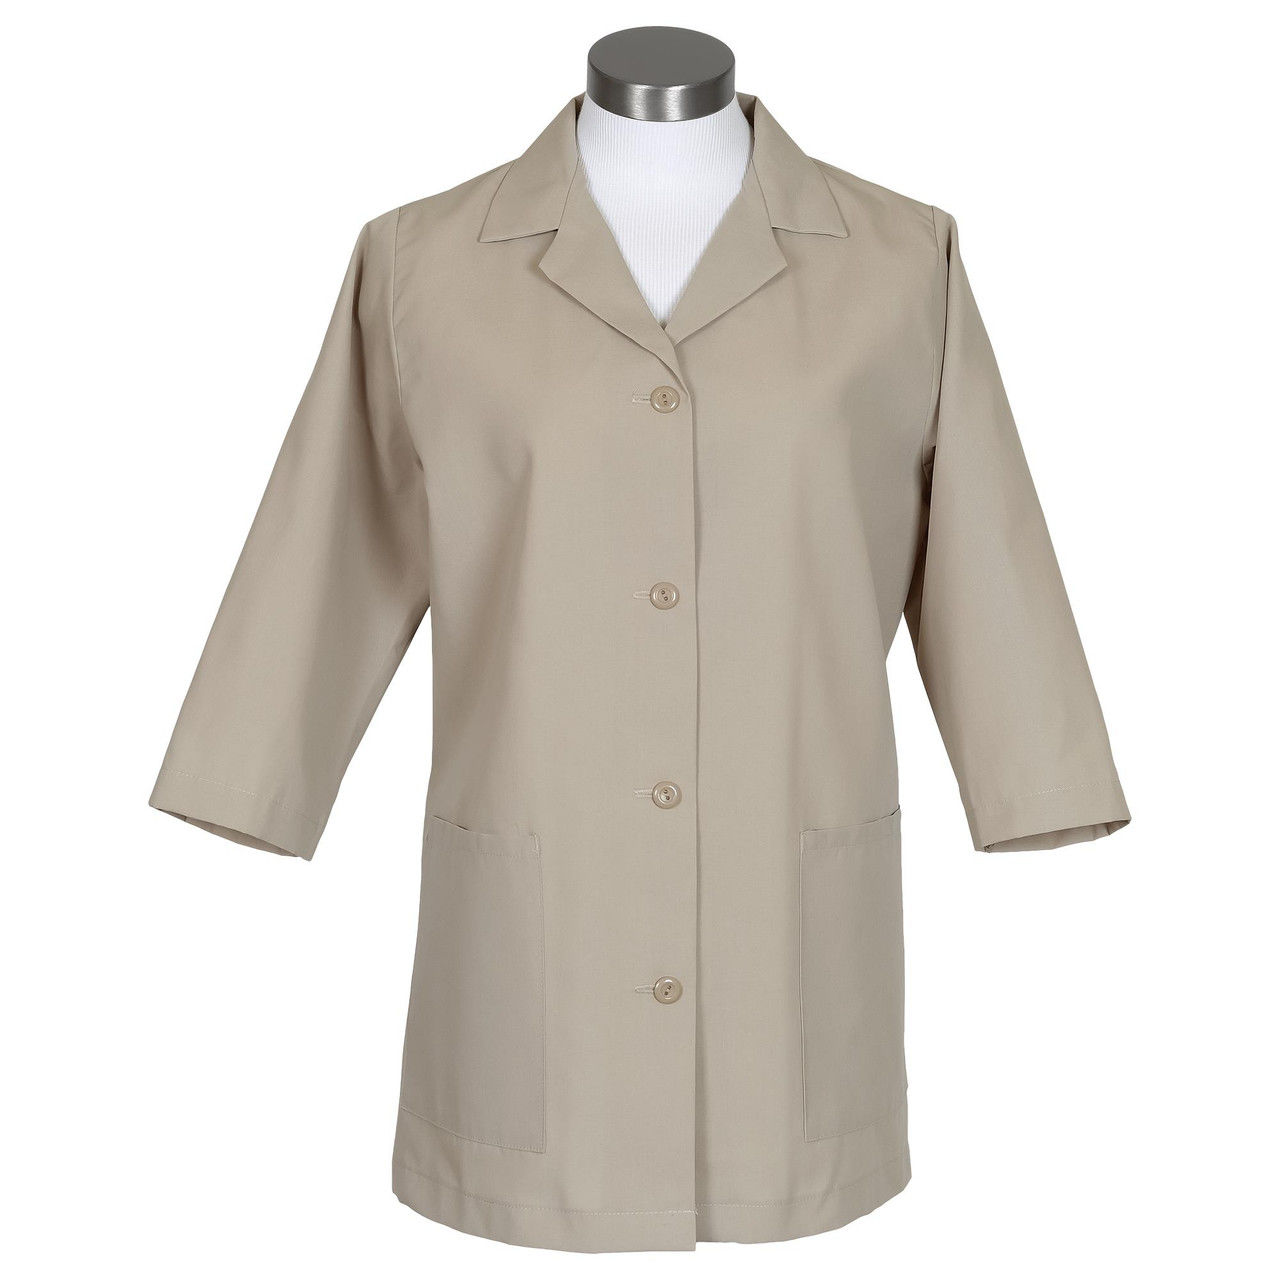 Can you tell me the fabric composition of the tan smock in the 'Female Smock, Tan, Fame 72' product?